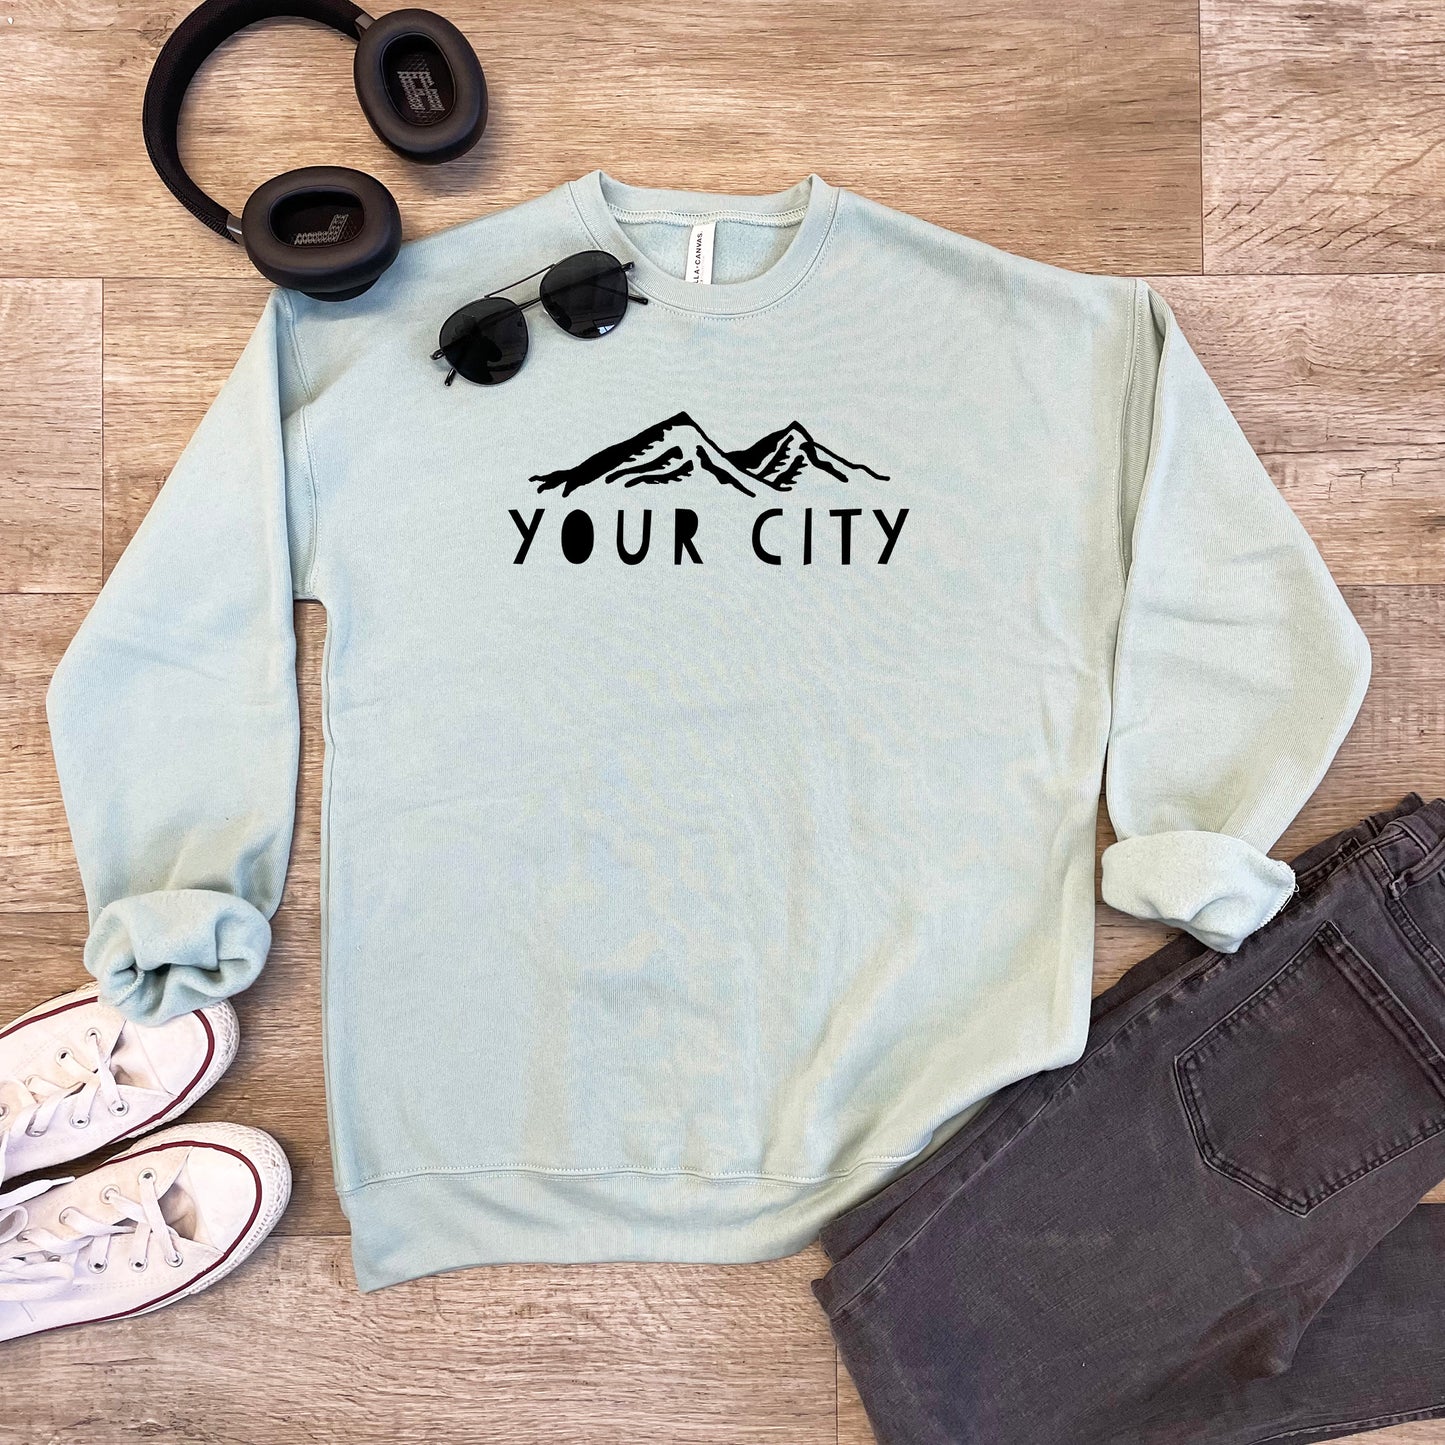 a pair of headphones and a sweatshirt with the words your city printed on it